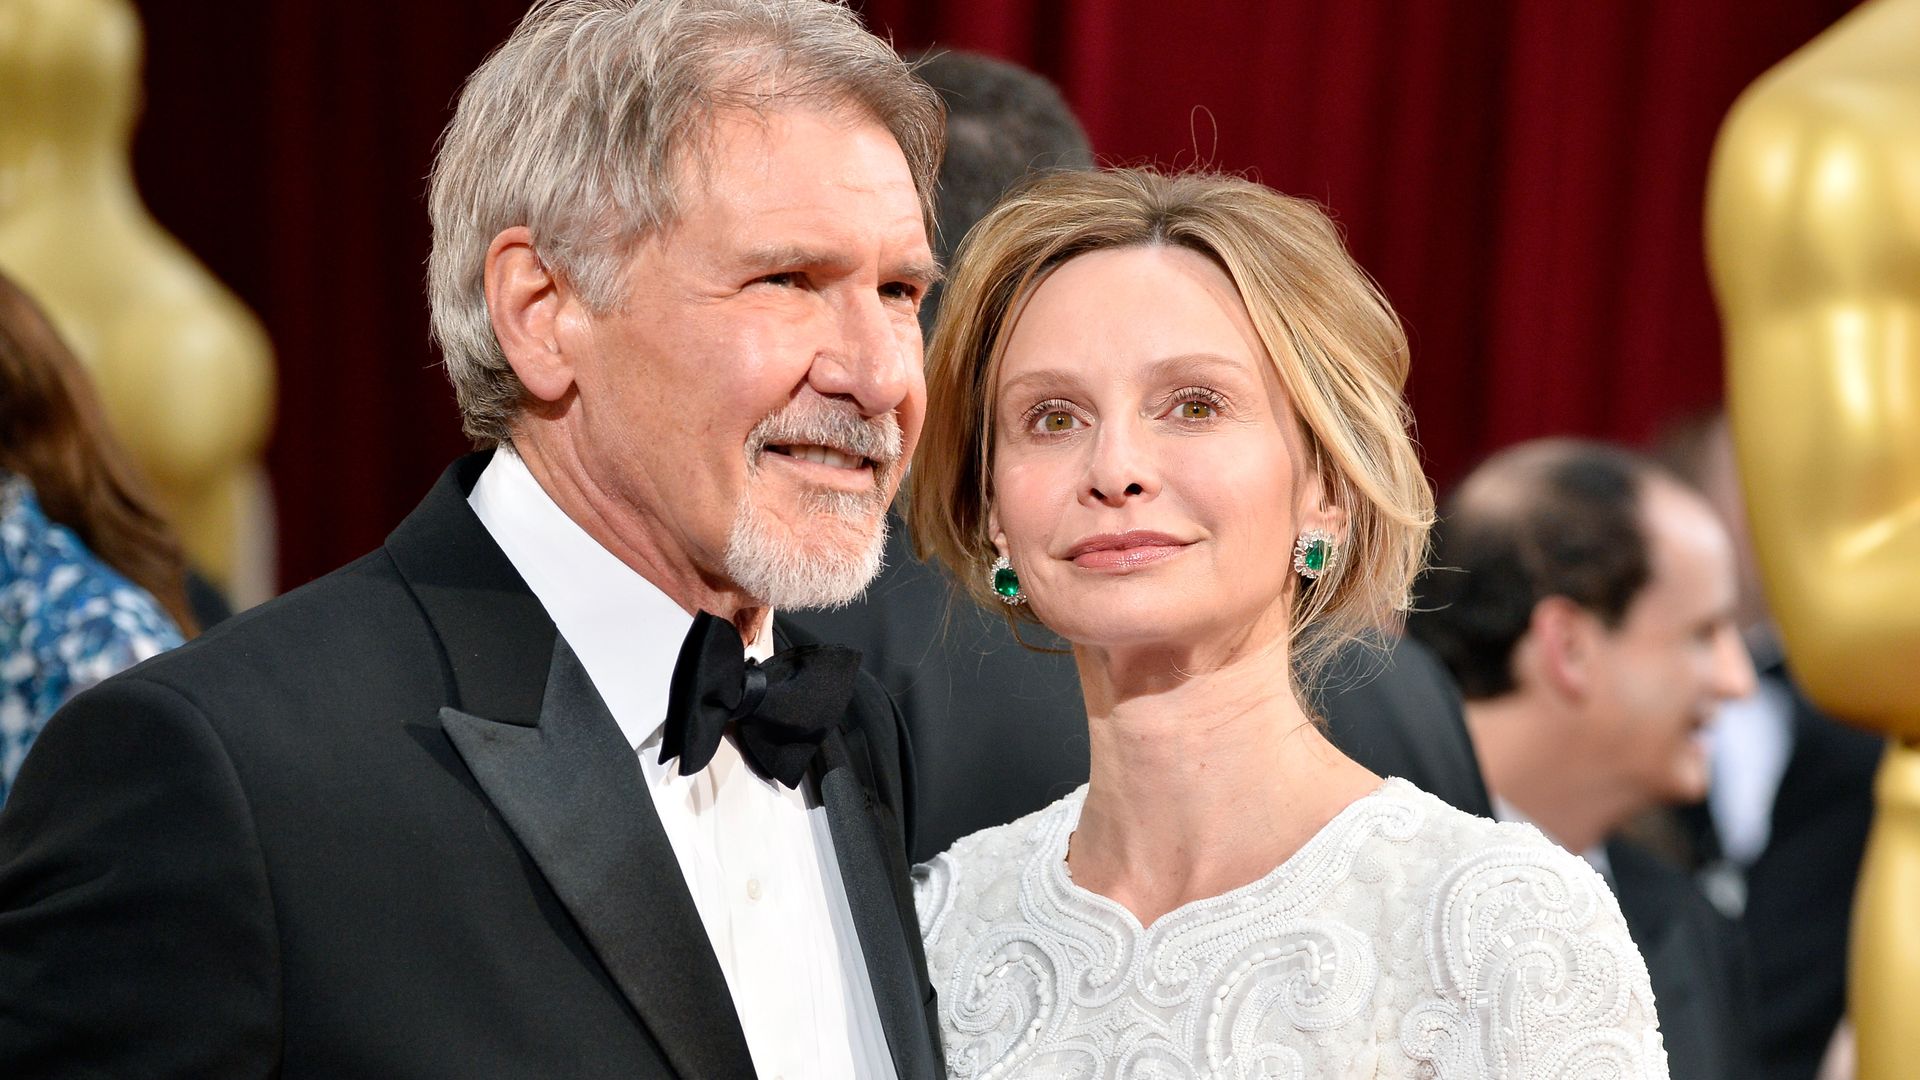 Harrison Ford and Calista Flockhart attend the Oscars in 2014